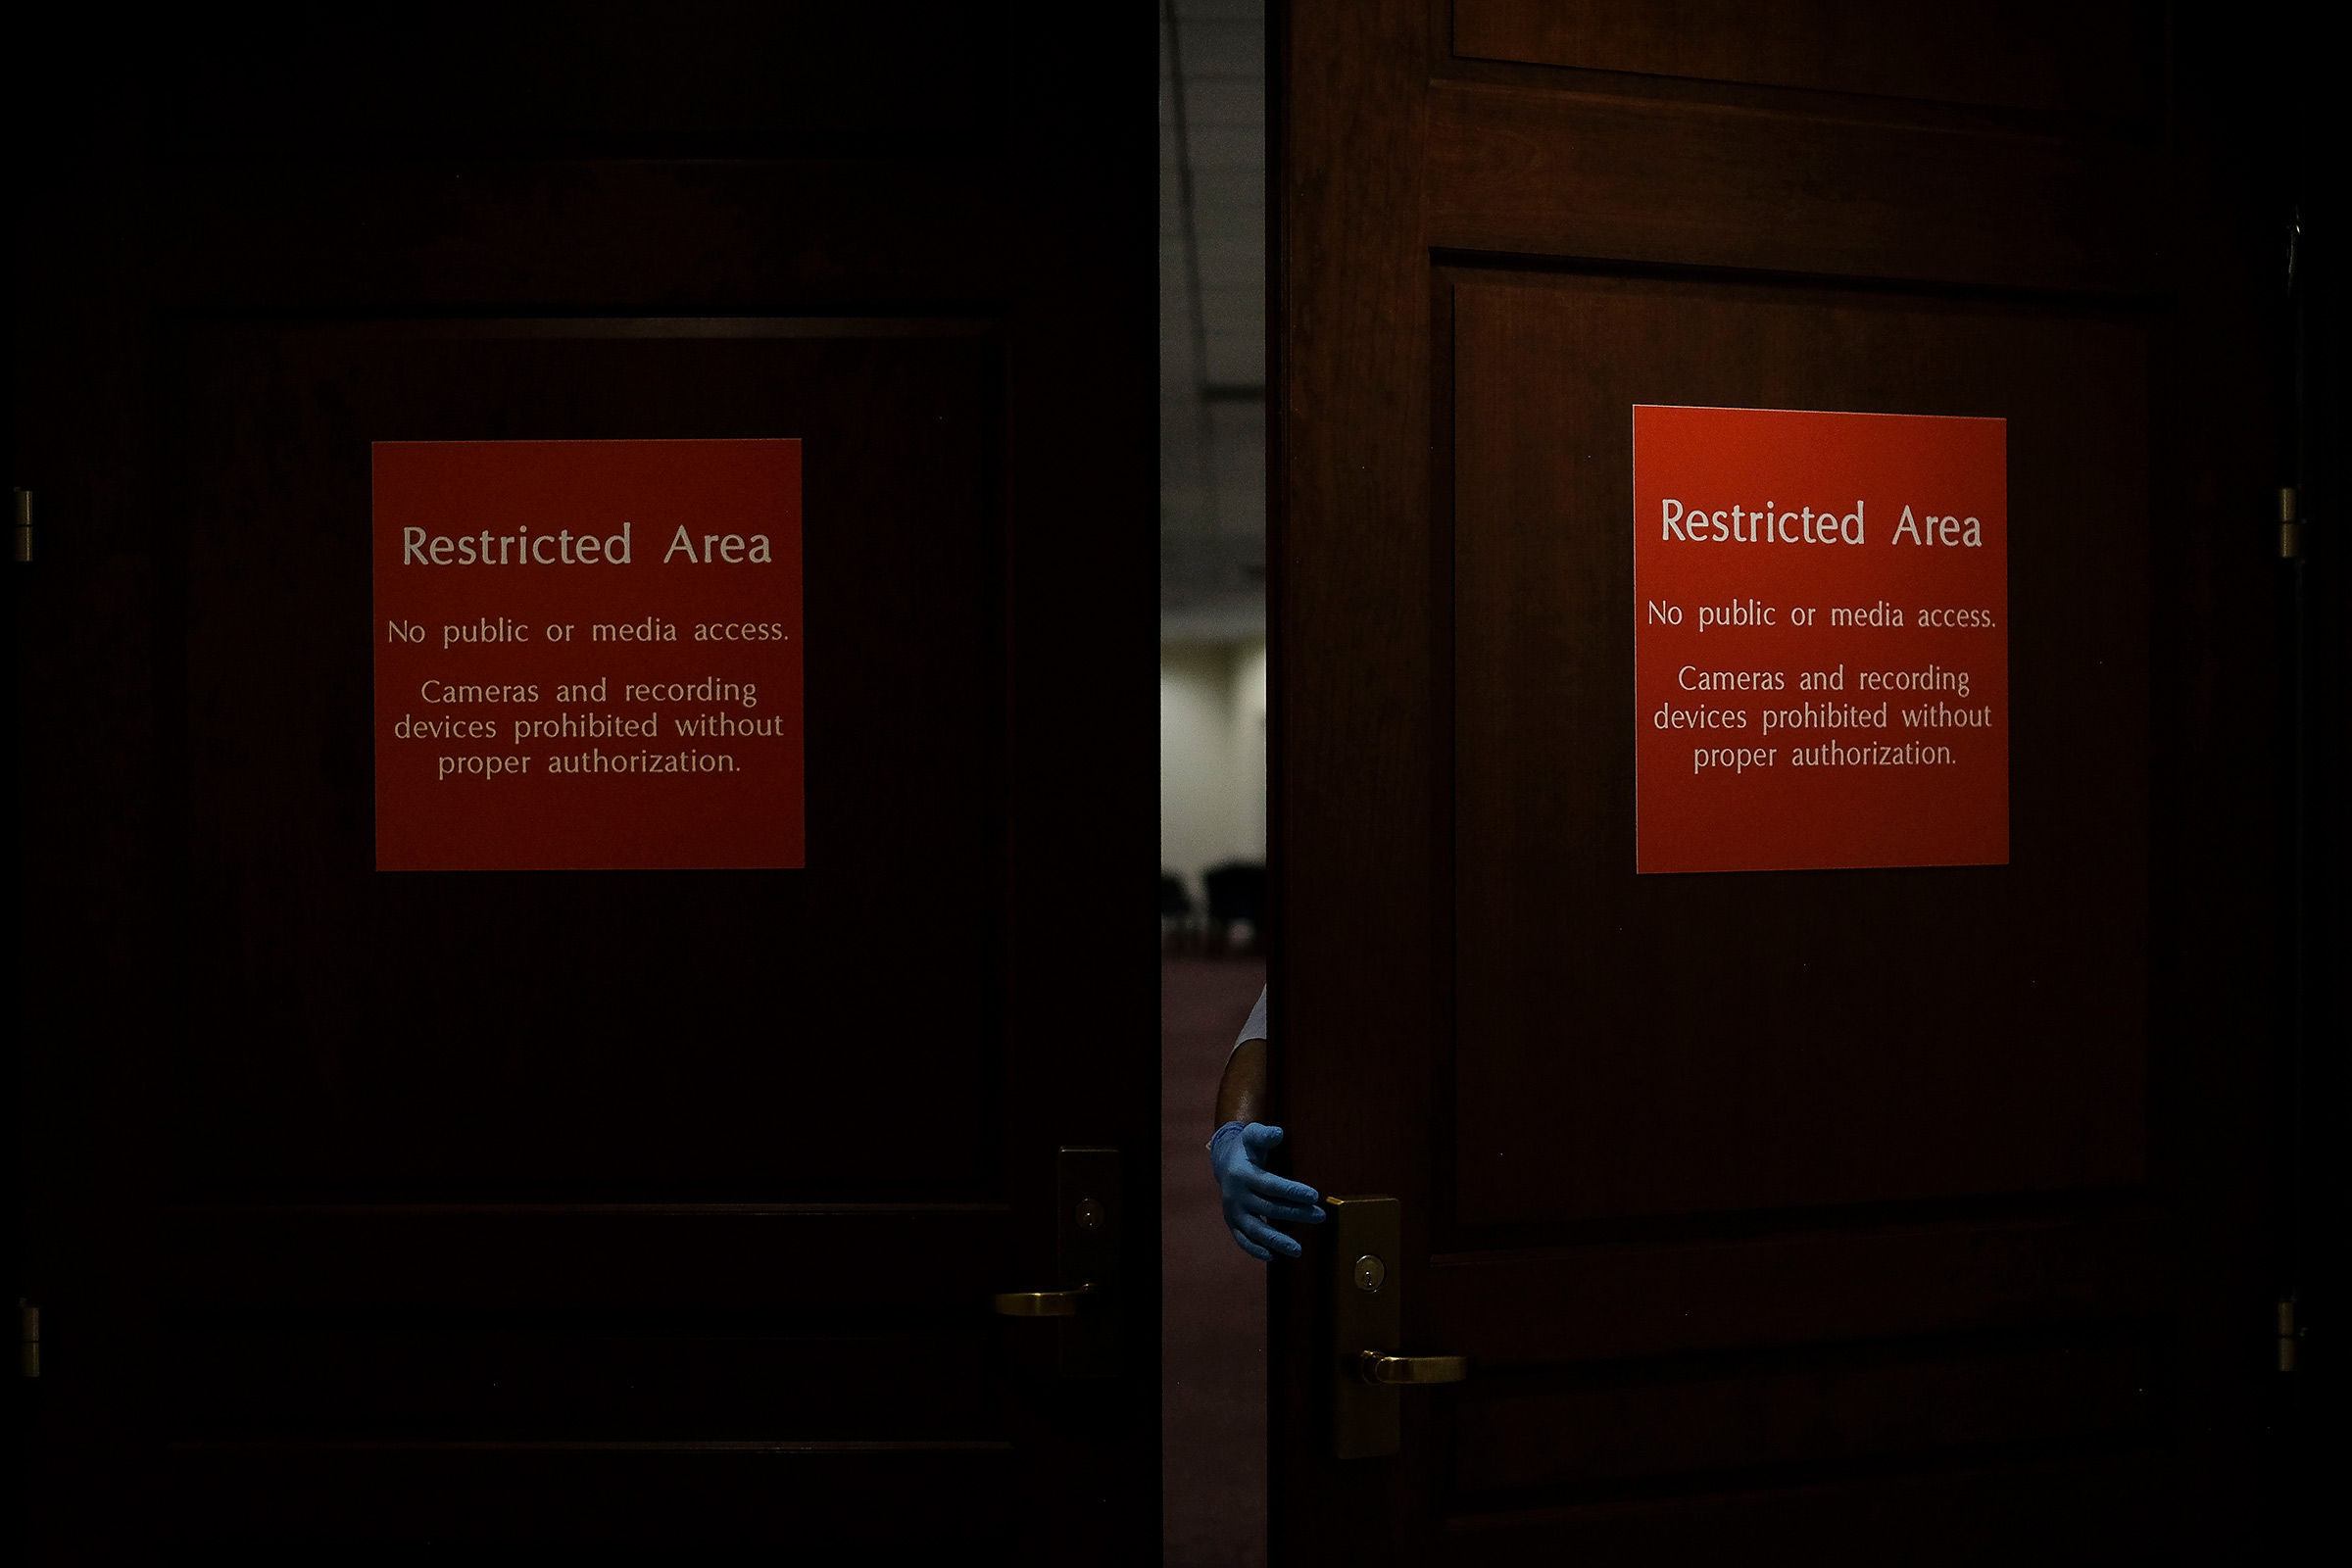 A custodial staff member walks into the sensitive compartmented information facility (SCIF), where Democrats conducted closed-door depositions during the House impeachment inquiry, in the basement of the Capitol in Washington, D.C., on Oct. 1, 2019. (Gabriella Demczuk for TIME)